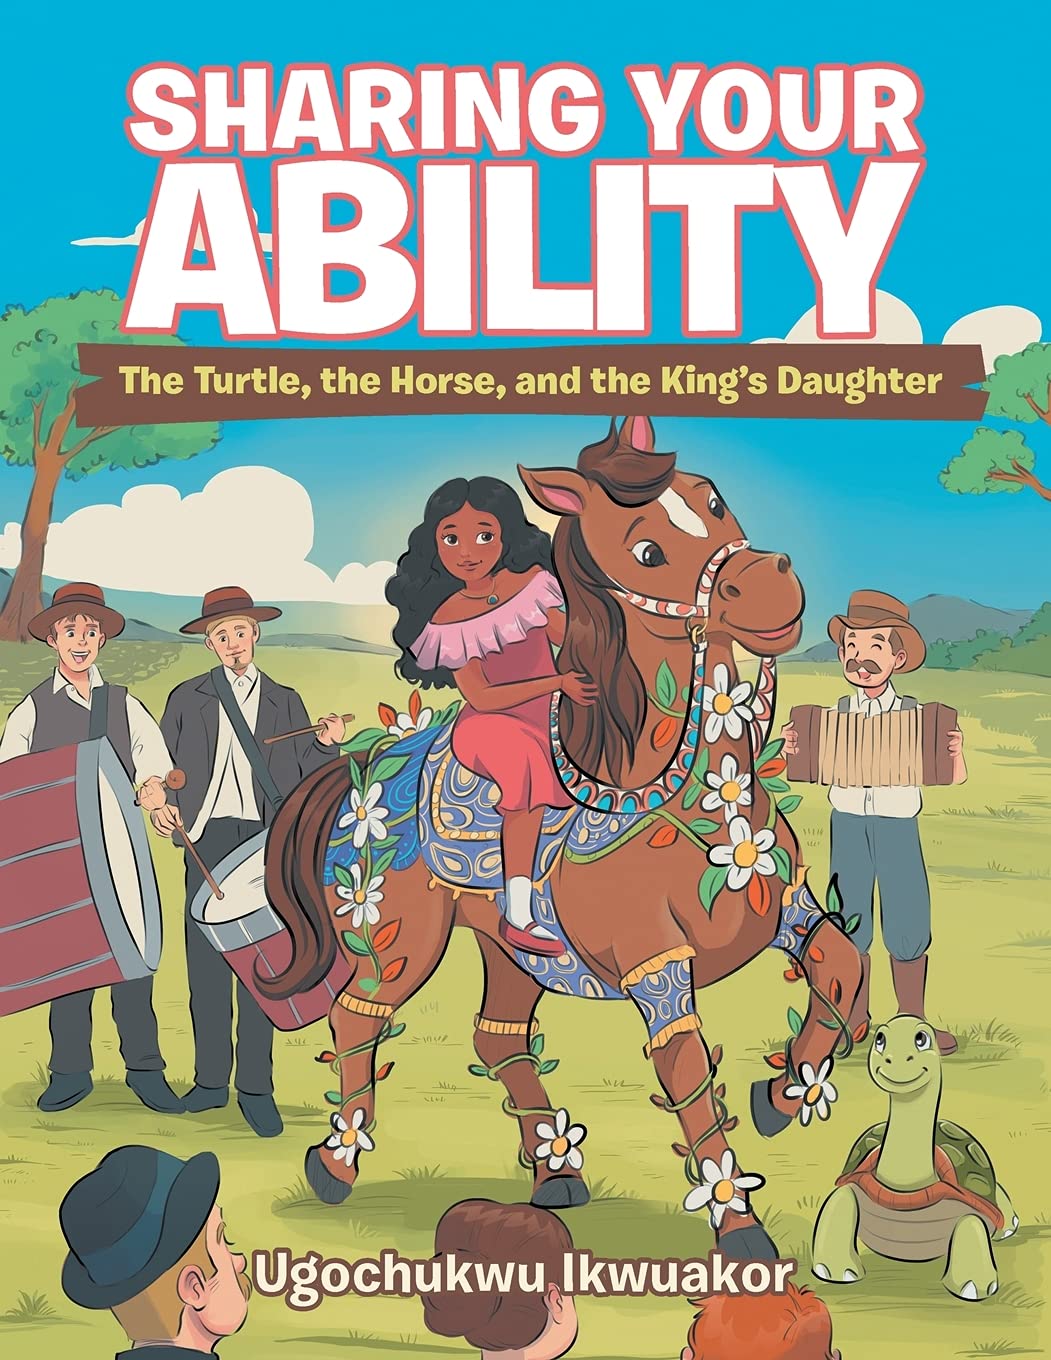 Author's Tranquility Press: New Children's Book "Sharing Your Ability: The Turtle, the Horse, and the King's Daughter" Teaches the Importance of Self-Acceptance and Sharing